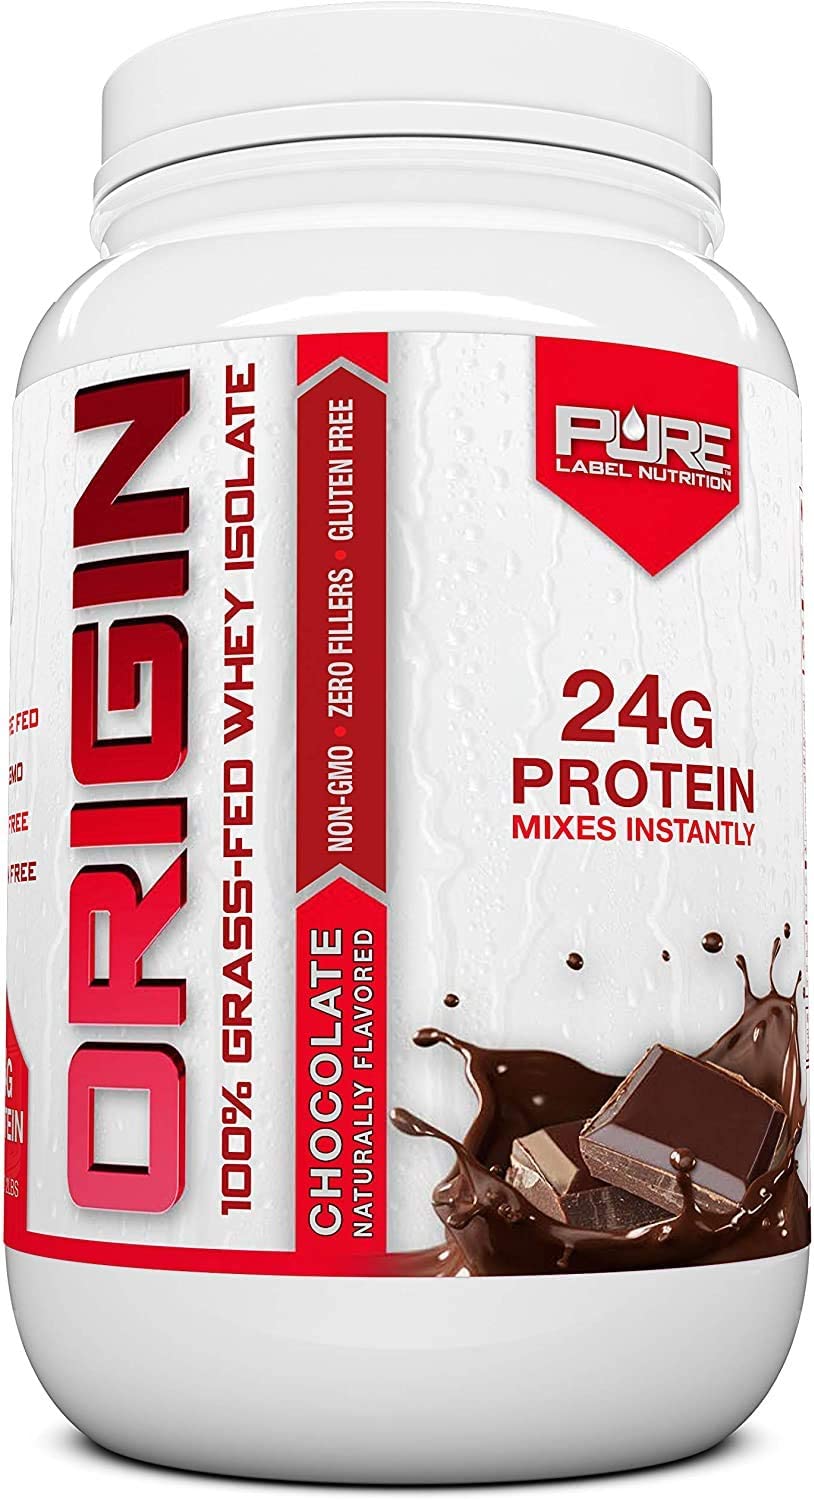 Pure Label Nutrition Immune Health Whey Protein Concentrate